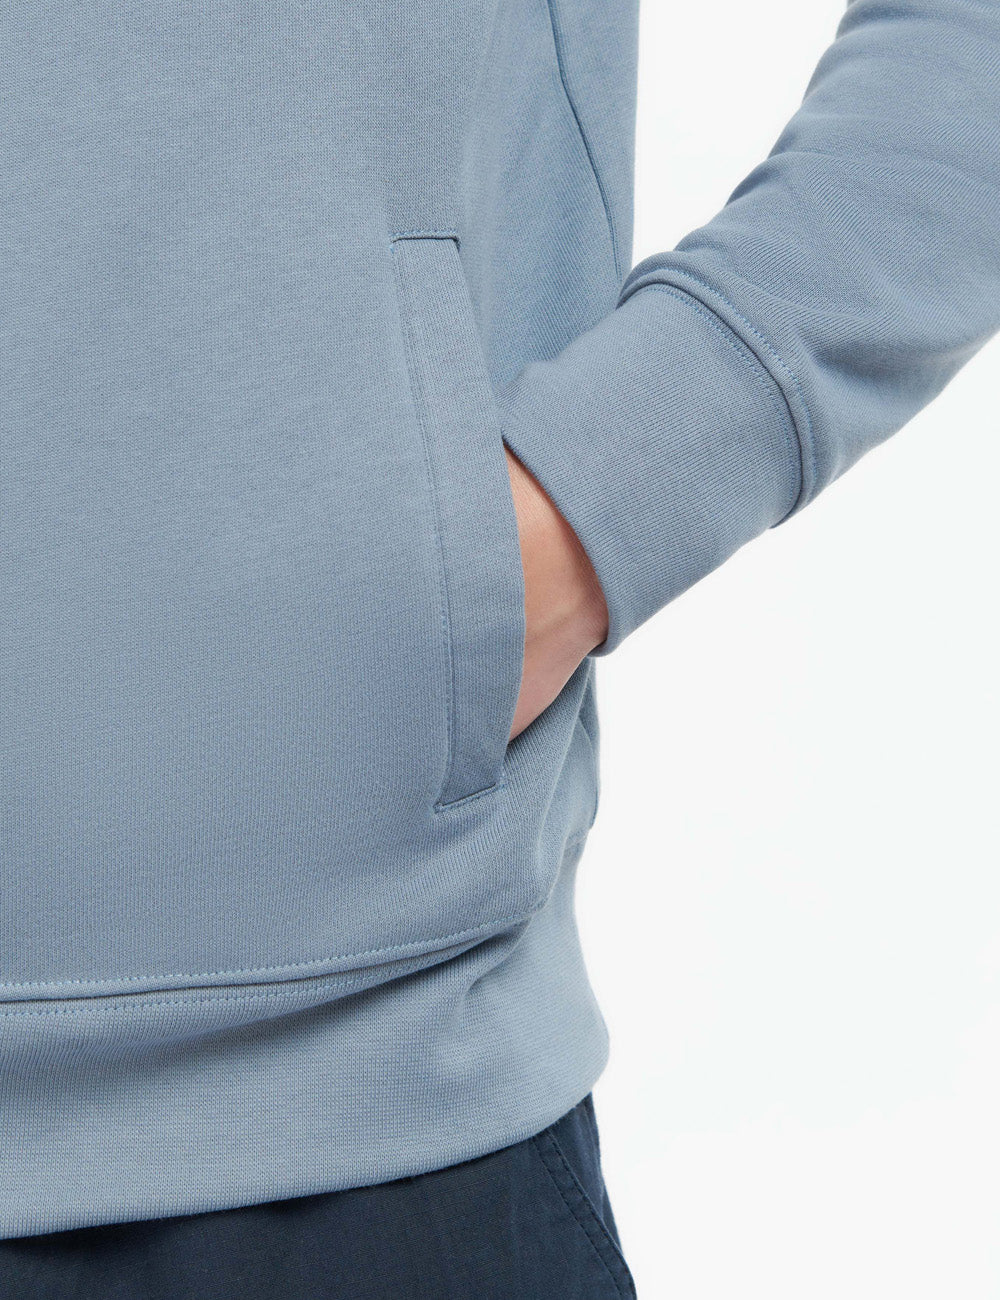 Close up of man wearing the Rothley Sweatshirt with his hand in the left side pocket